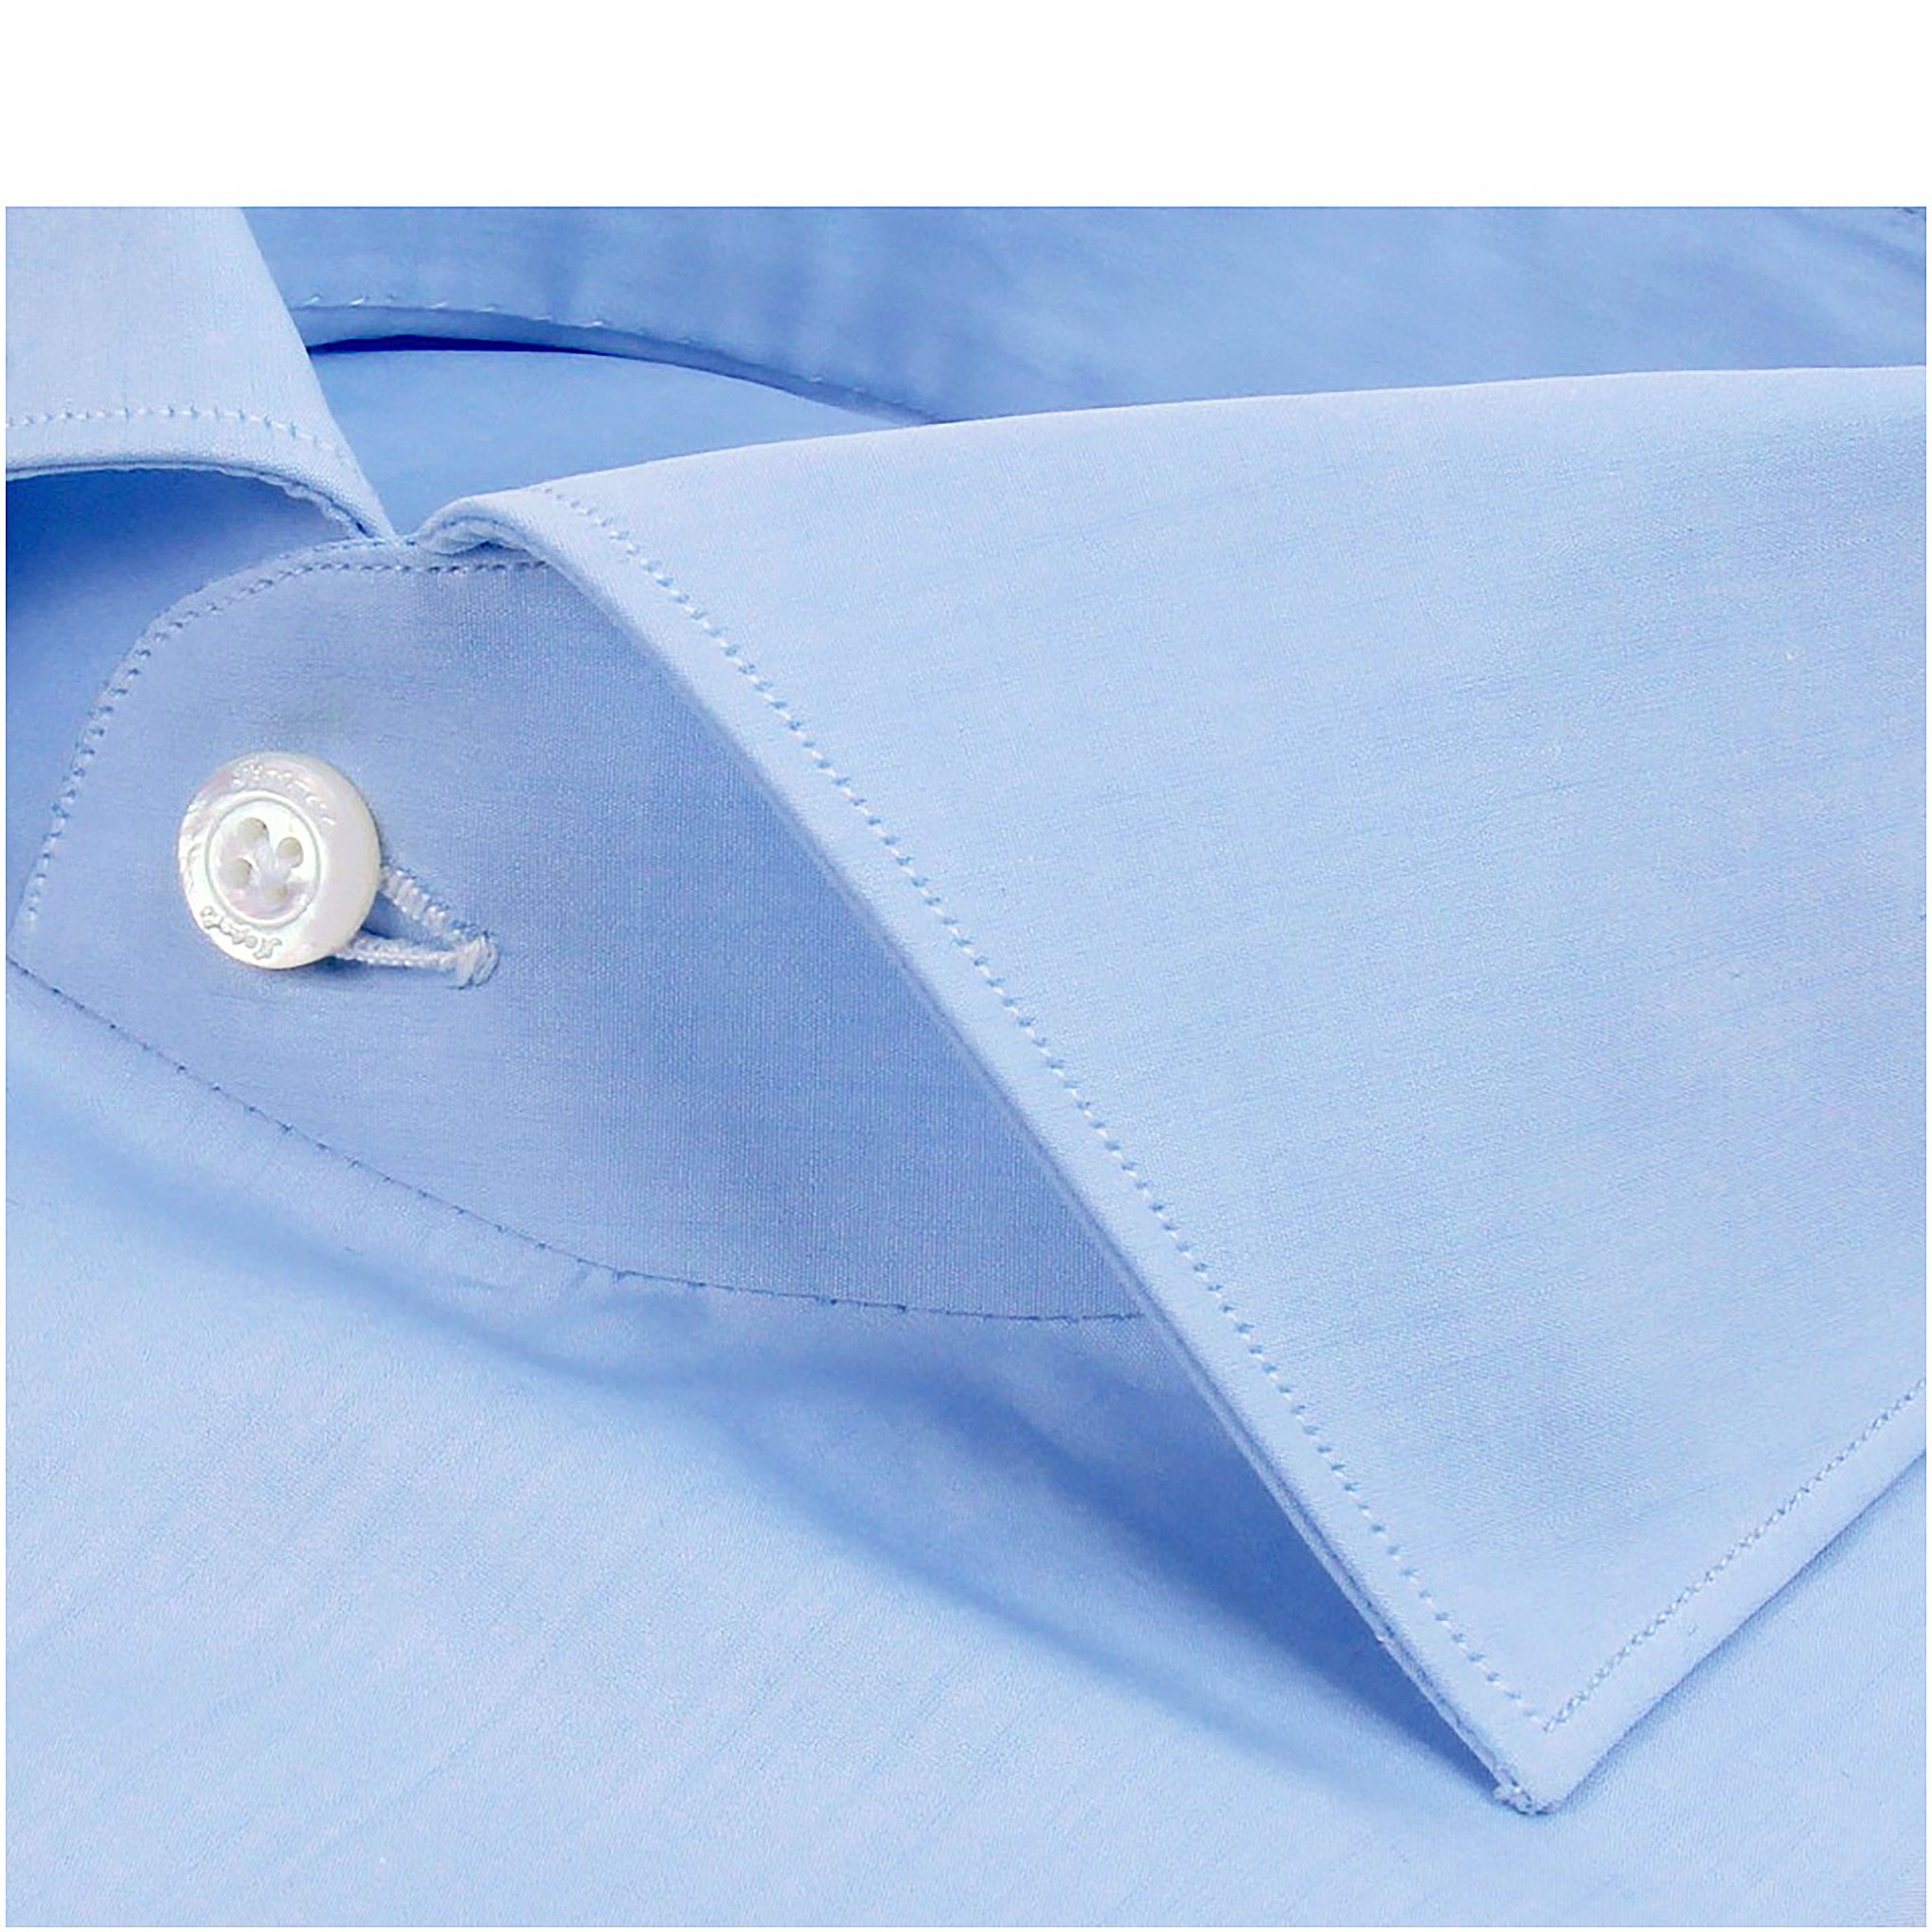 Milano 170 a due dress slim fit light blue or white french collar